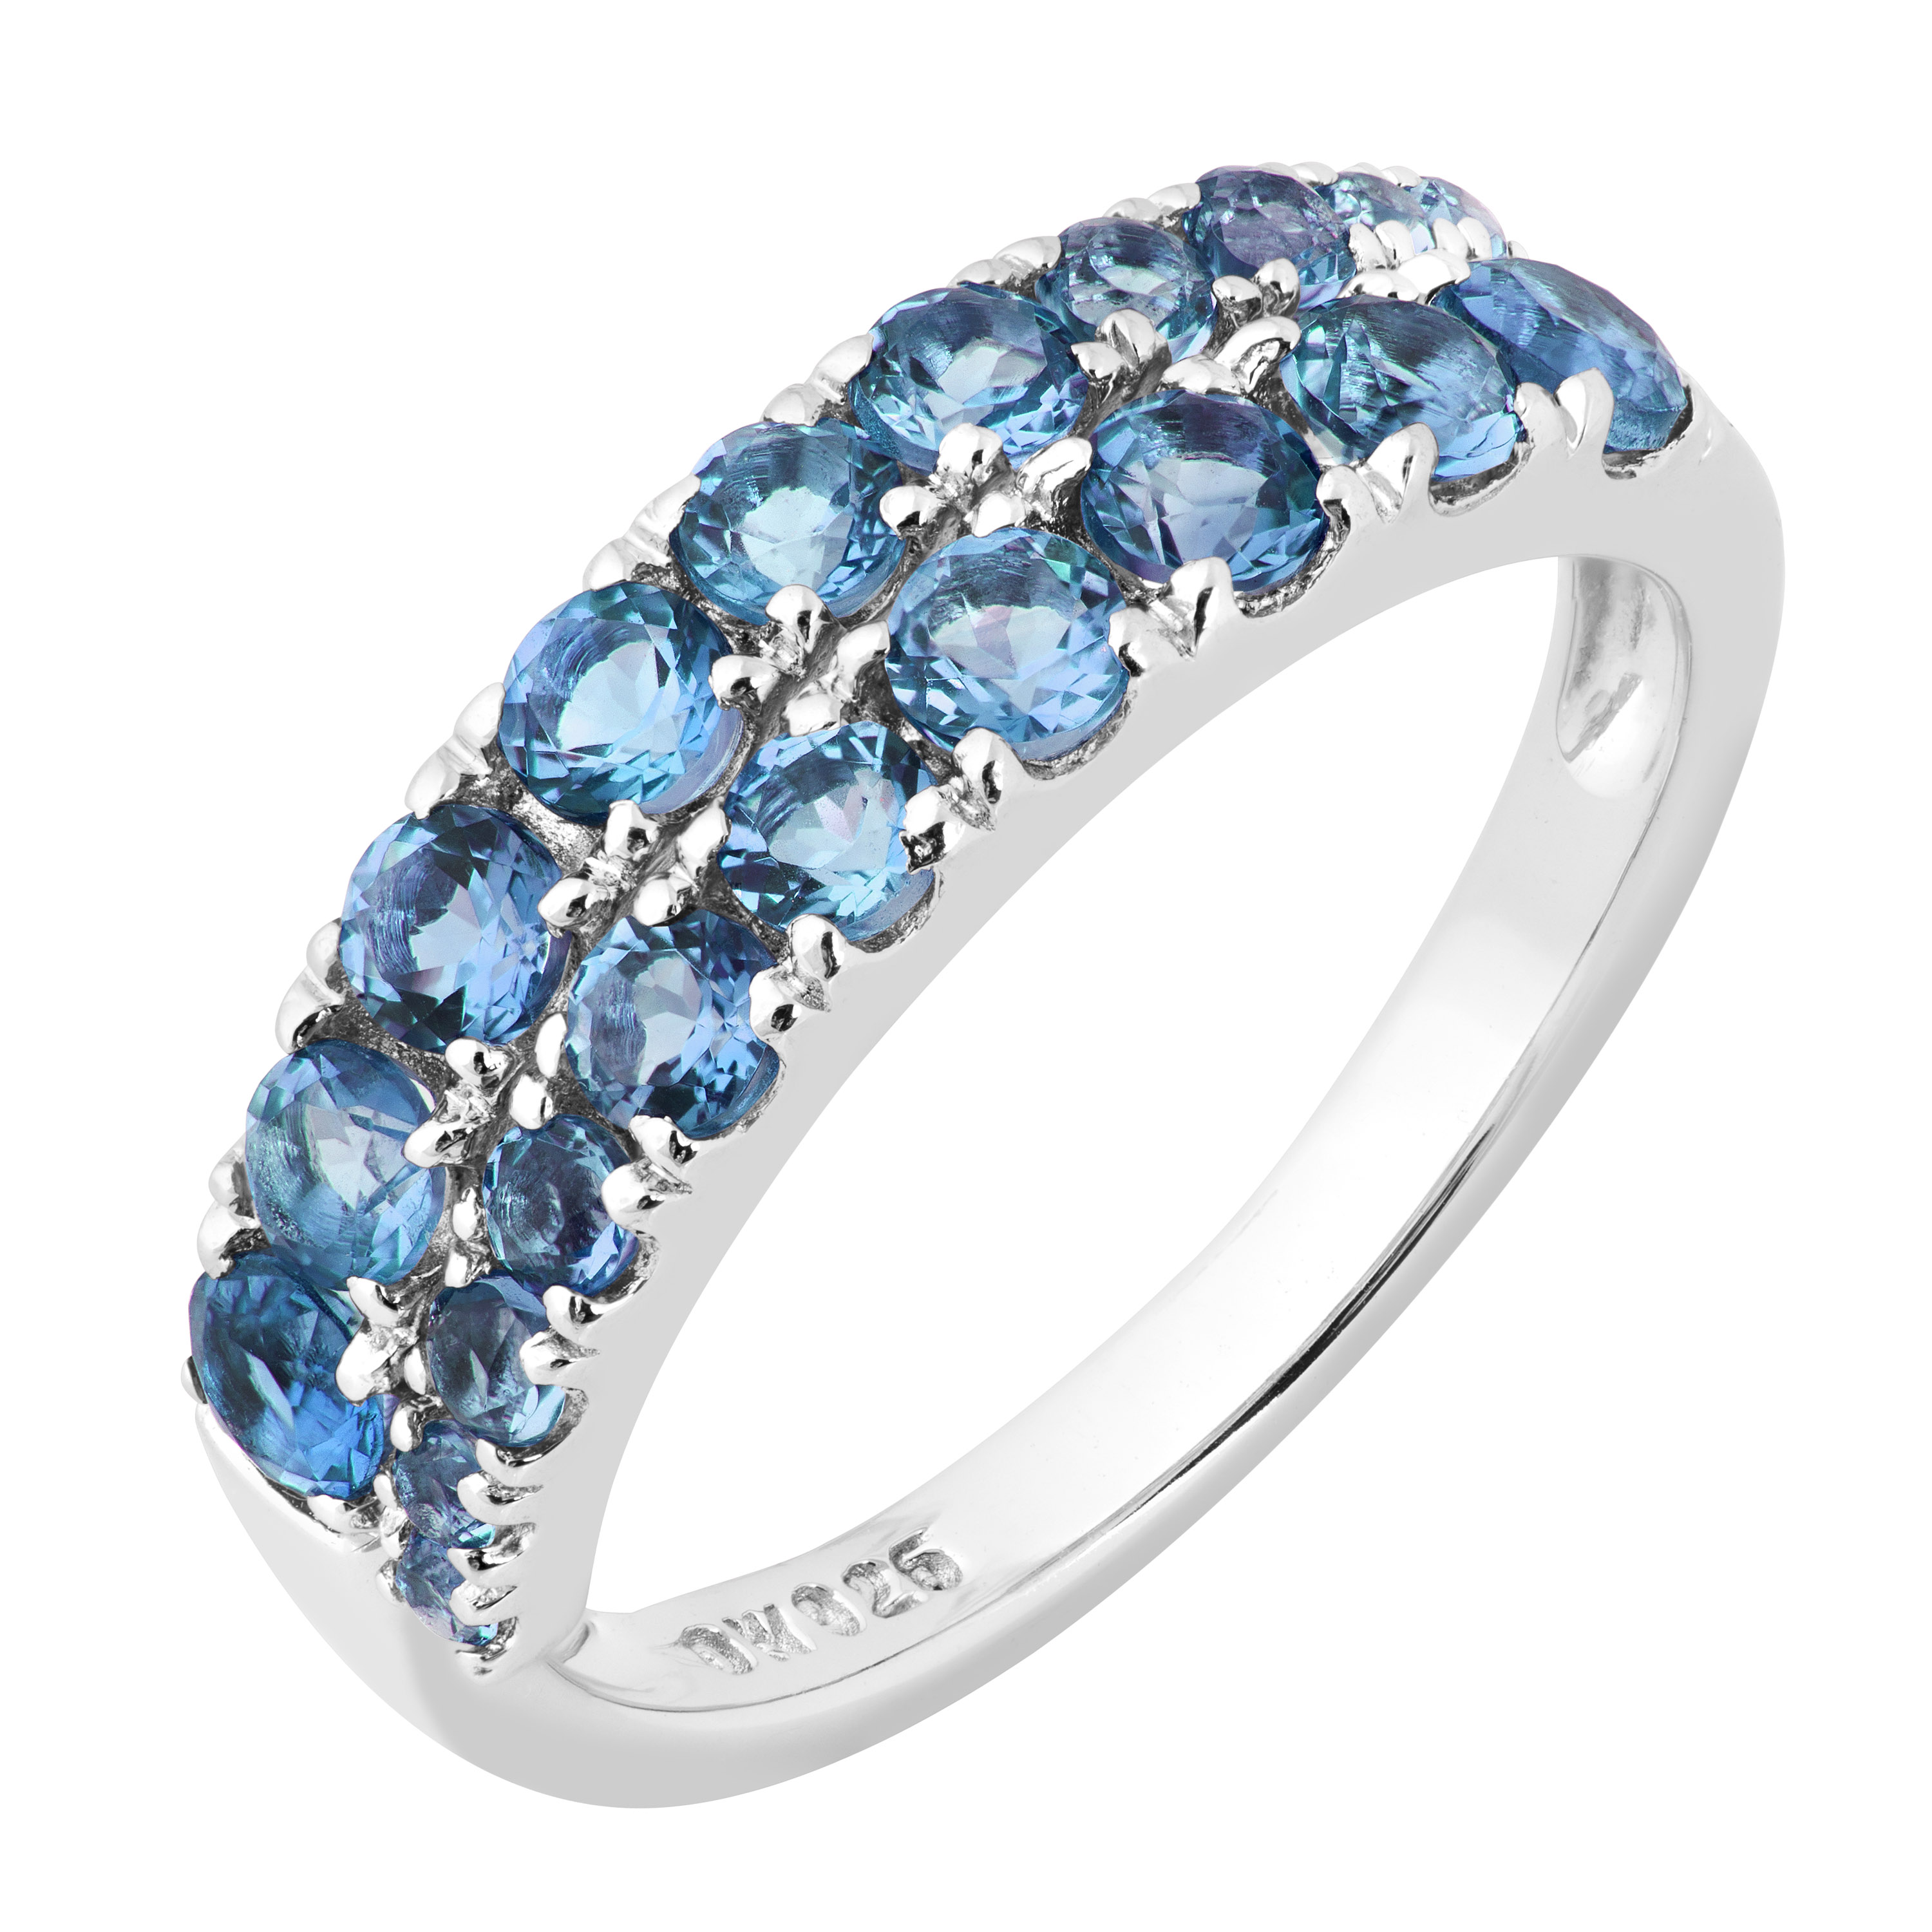 Swiss Blue Topaz Twisted Ring, Rhodium Plated Sterling Silver 